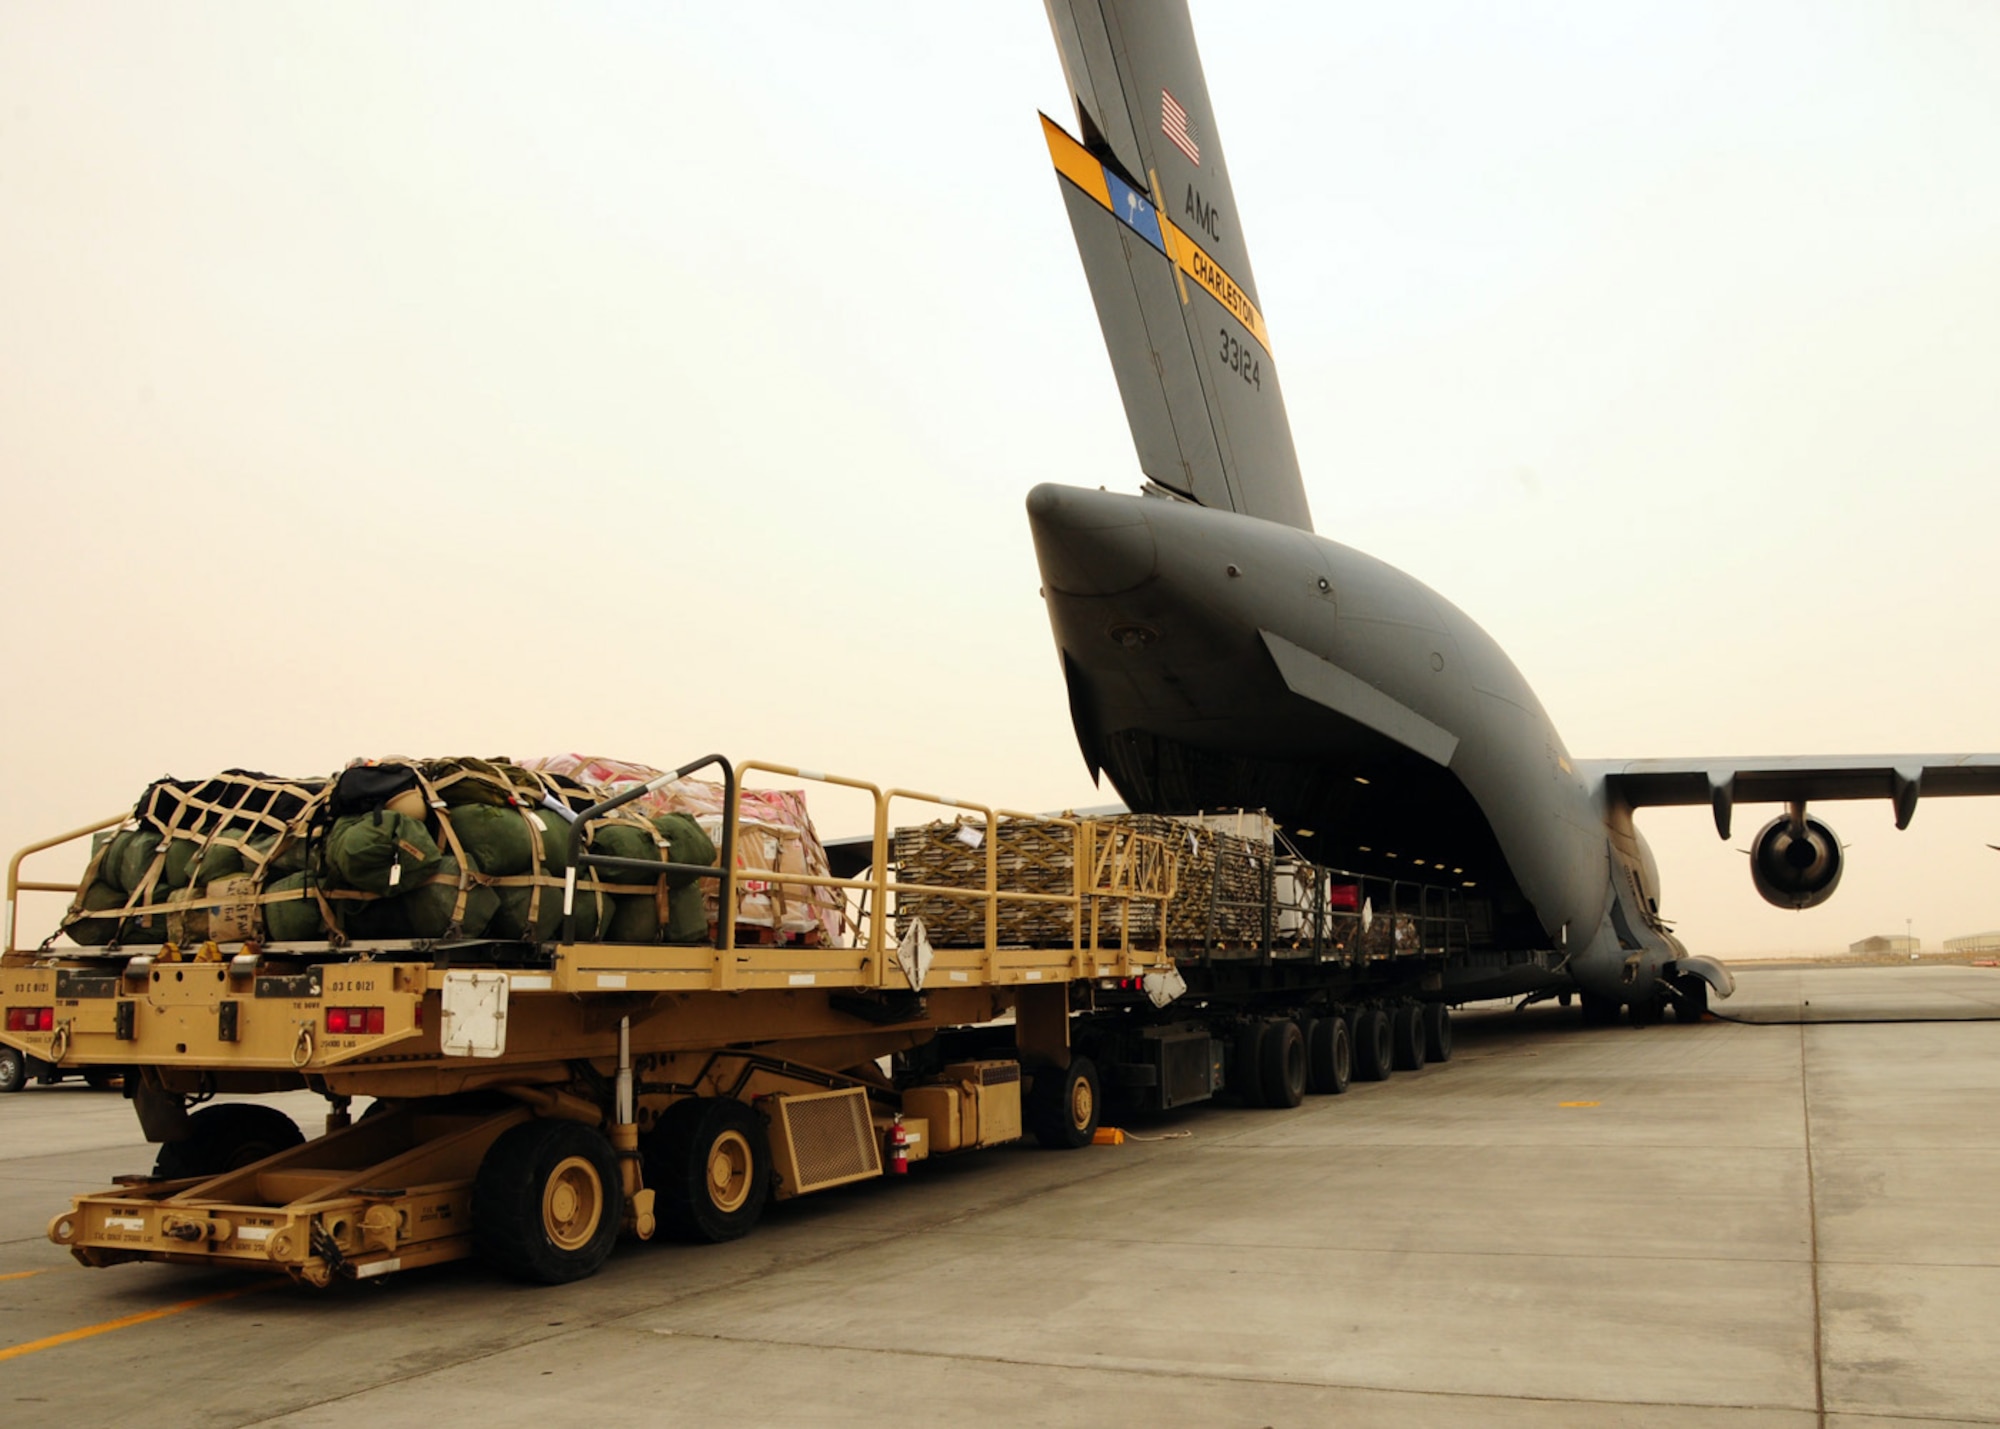 SOUTHWEST ASIA -- Cargo unloads from a C-17 Globemaster at an air base in Southwest Asia, May 6. Within an hour, this aircraft was loaded with new cargo and sent to Afghanistan. (U.S. Air Force photo/ Senior Airman Courtney Richardson)